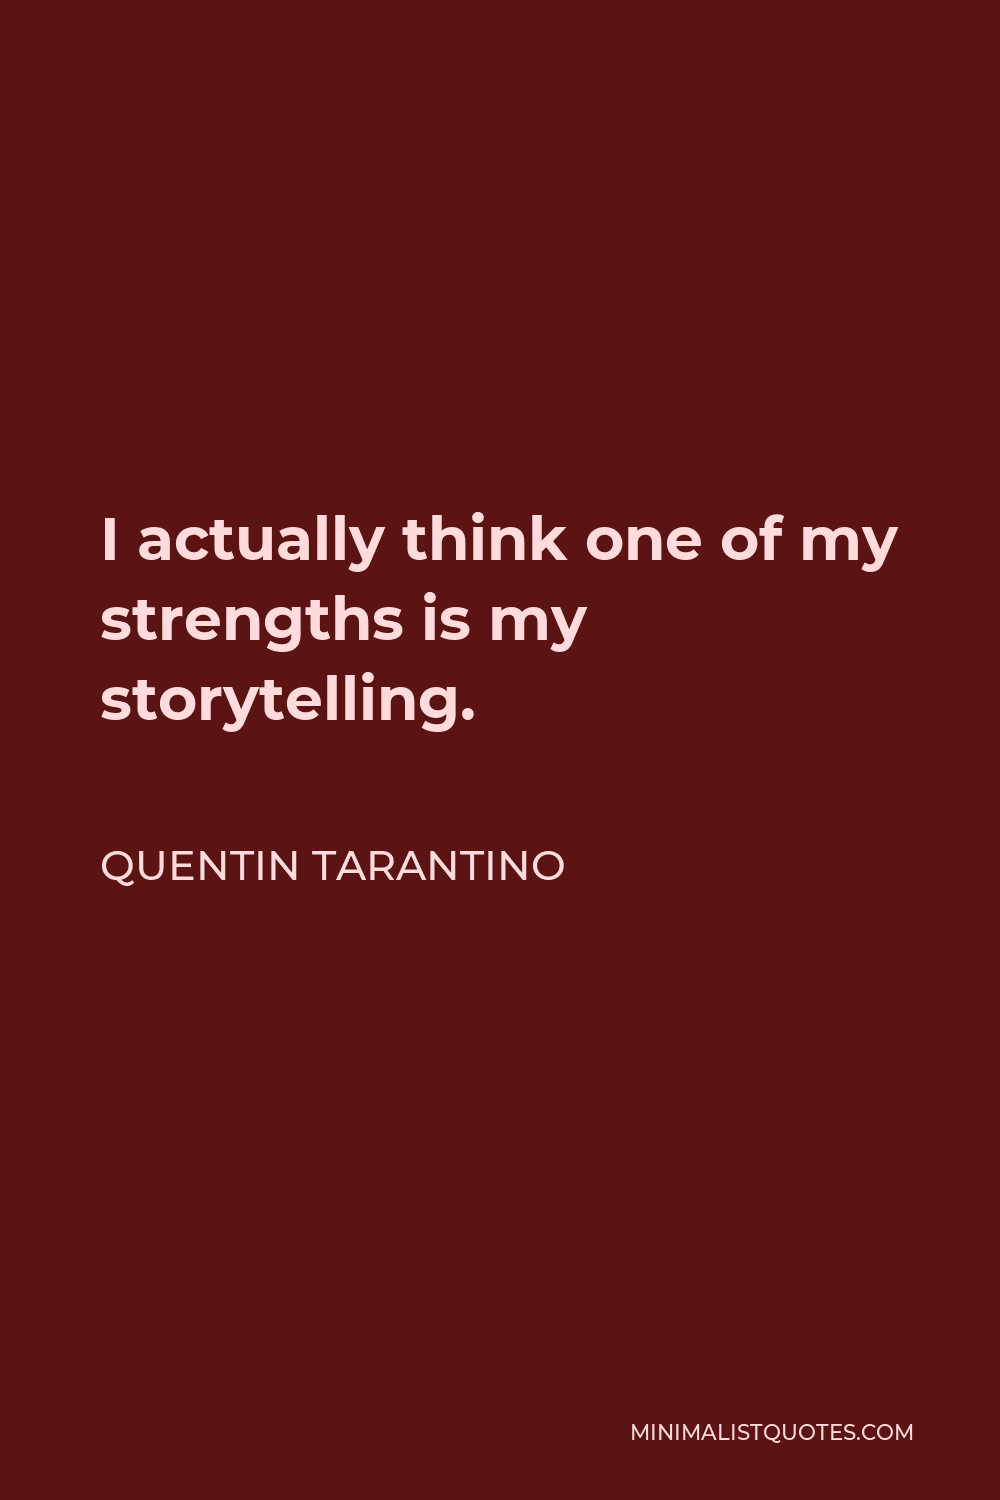 Quentin Tarantino Quote - I actually think one of my strengths is my storytelling.